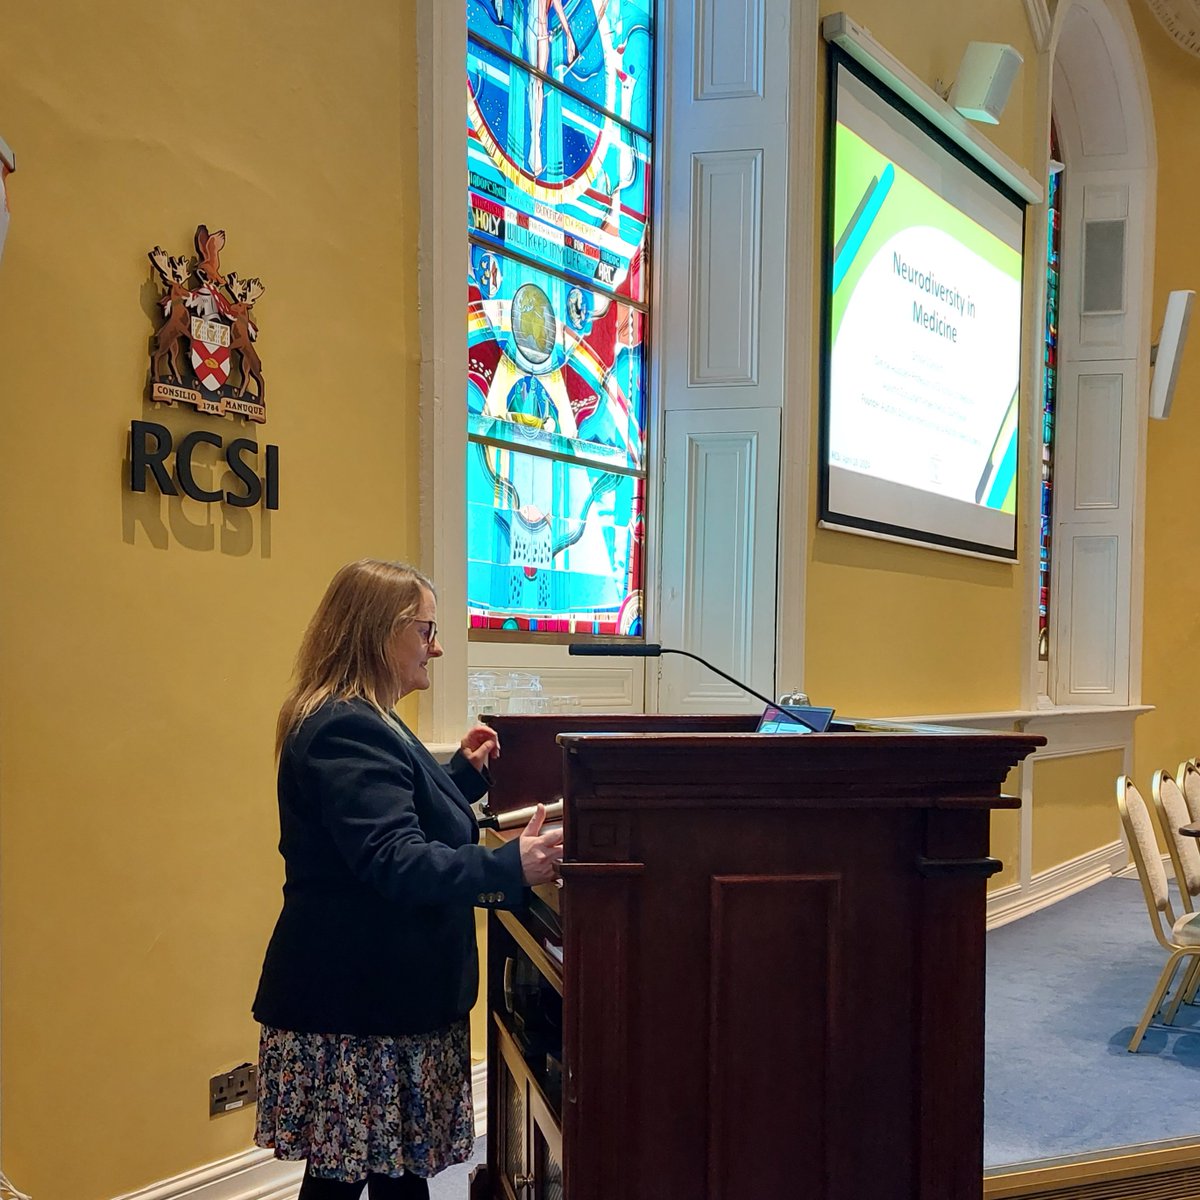 'Most neurodivergent trainees and colleagues are not in difficulty' @AutisticDoctor challenging deficit approach that increases stigma. We are delighted to have her speaking at RCSI today. Thanks to Mary and to @zoeenya22 for help organising.